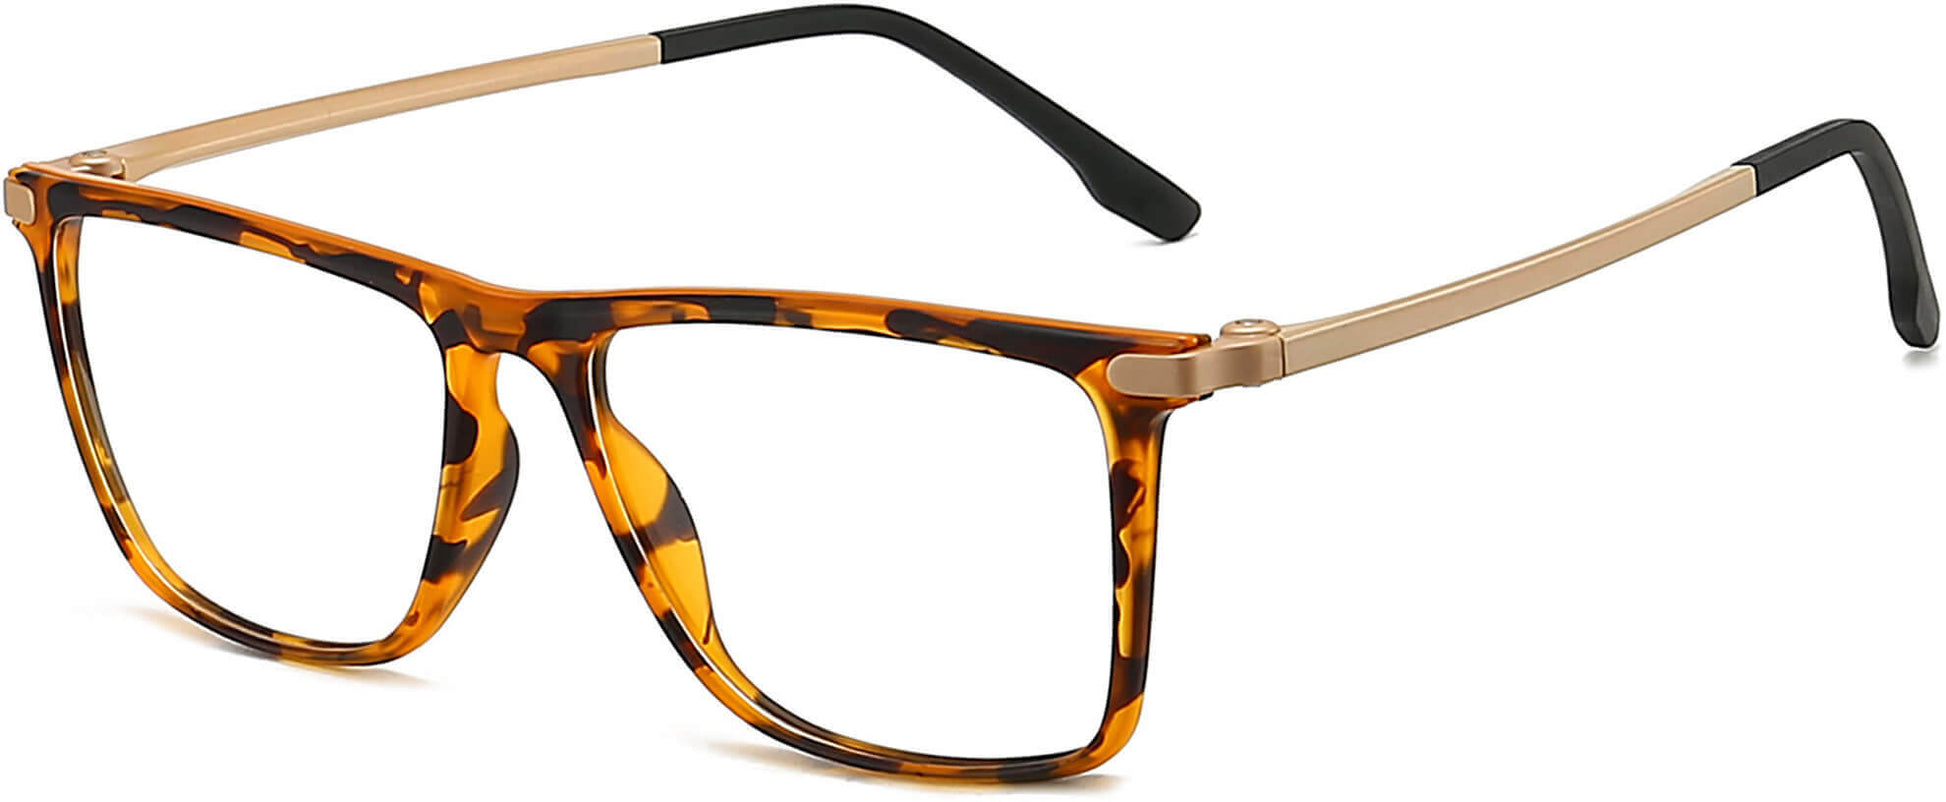 Brook Rectangle Tortoise Eyeglasses  from ANRRI, angle view